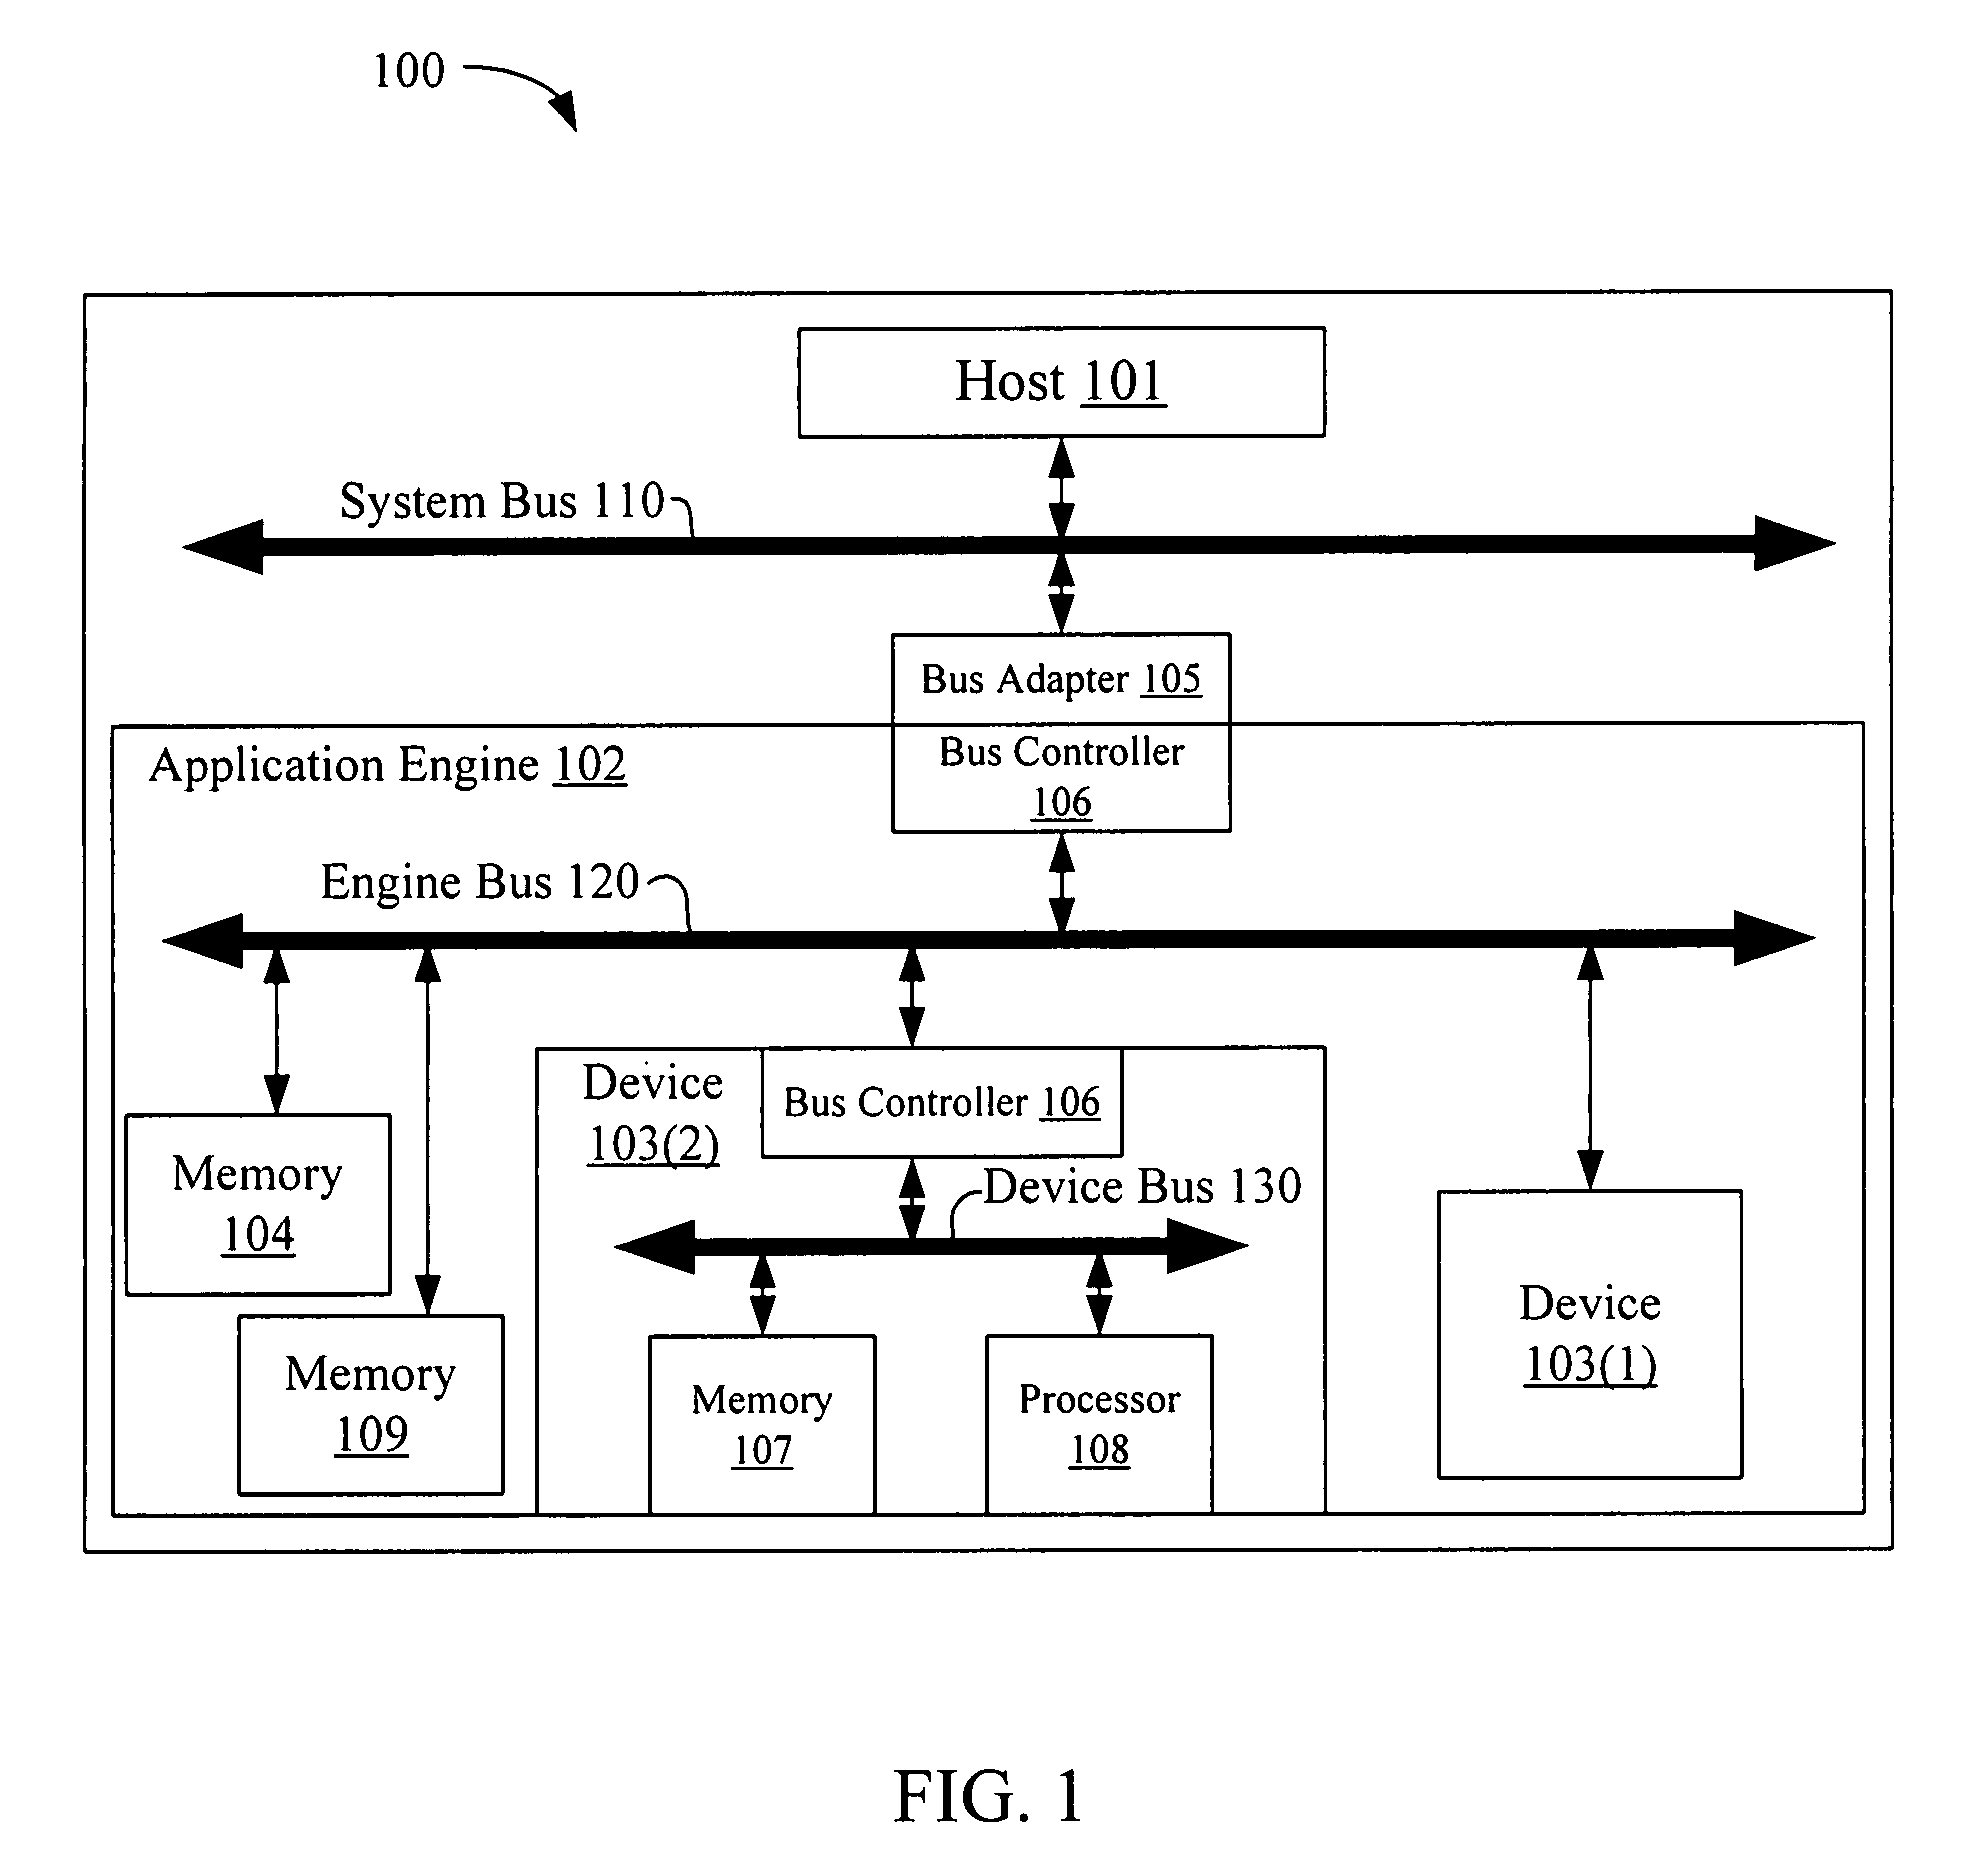 Non-blocking bus controller for a pipelined, variable latency, hierarchical bus with point-to-point first-in first-out ordering